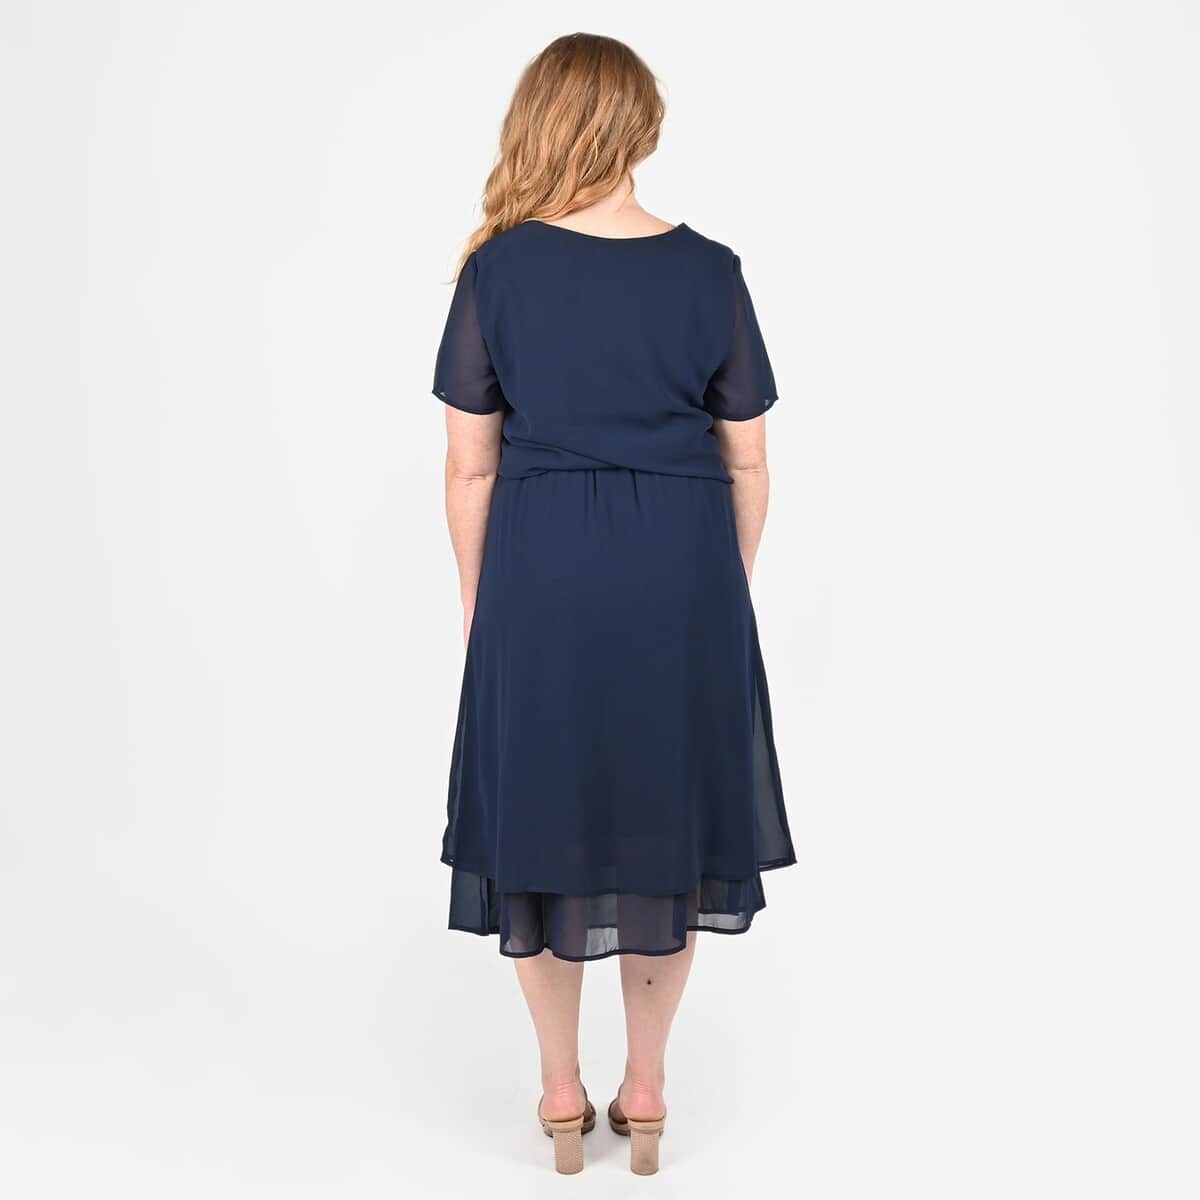 Tamsy Navy 2-piece Chiffon Skirt Set - L image number 1